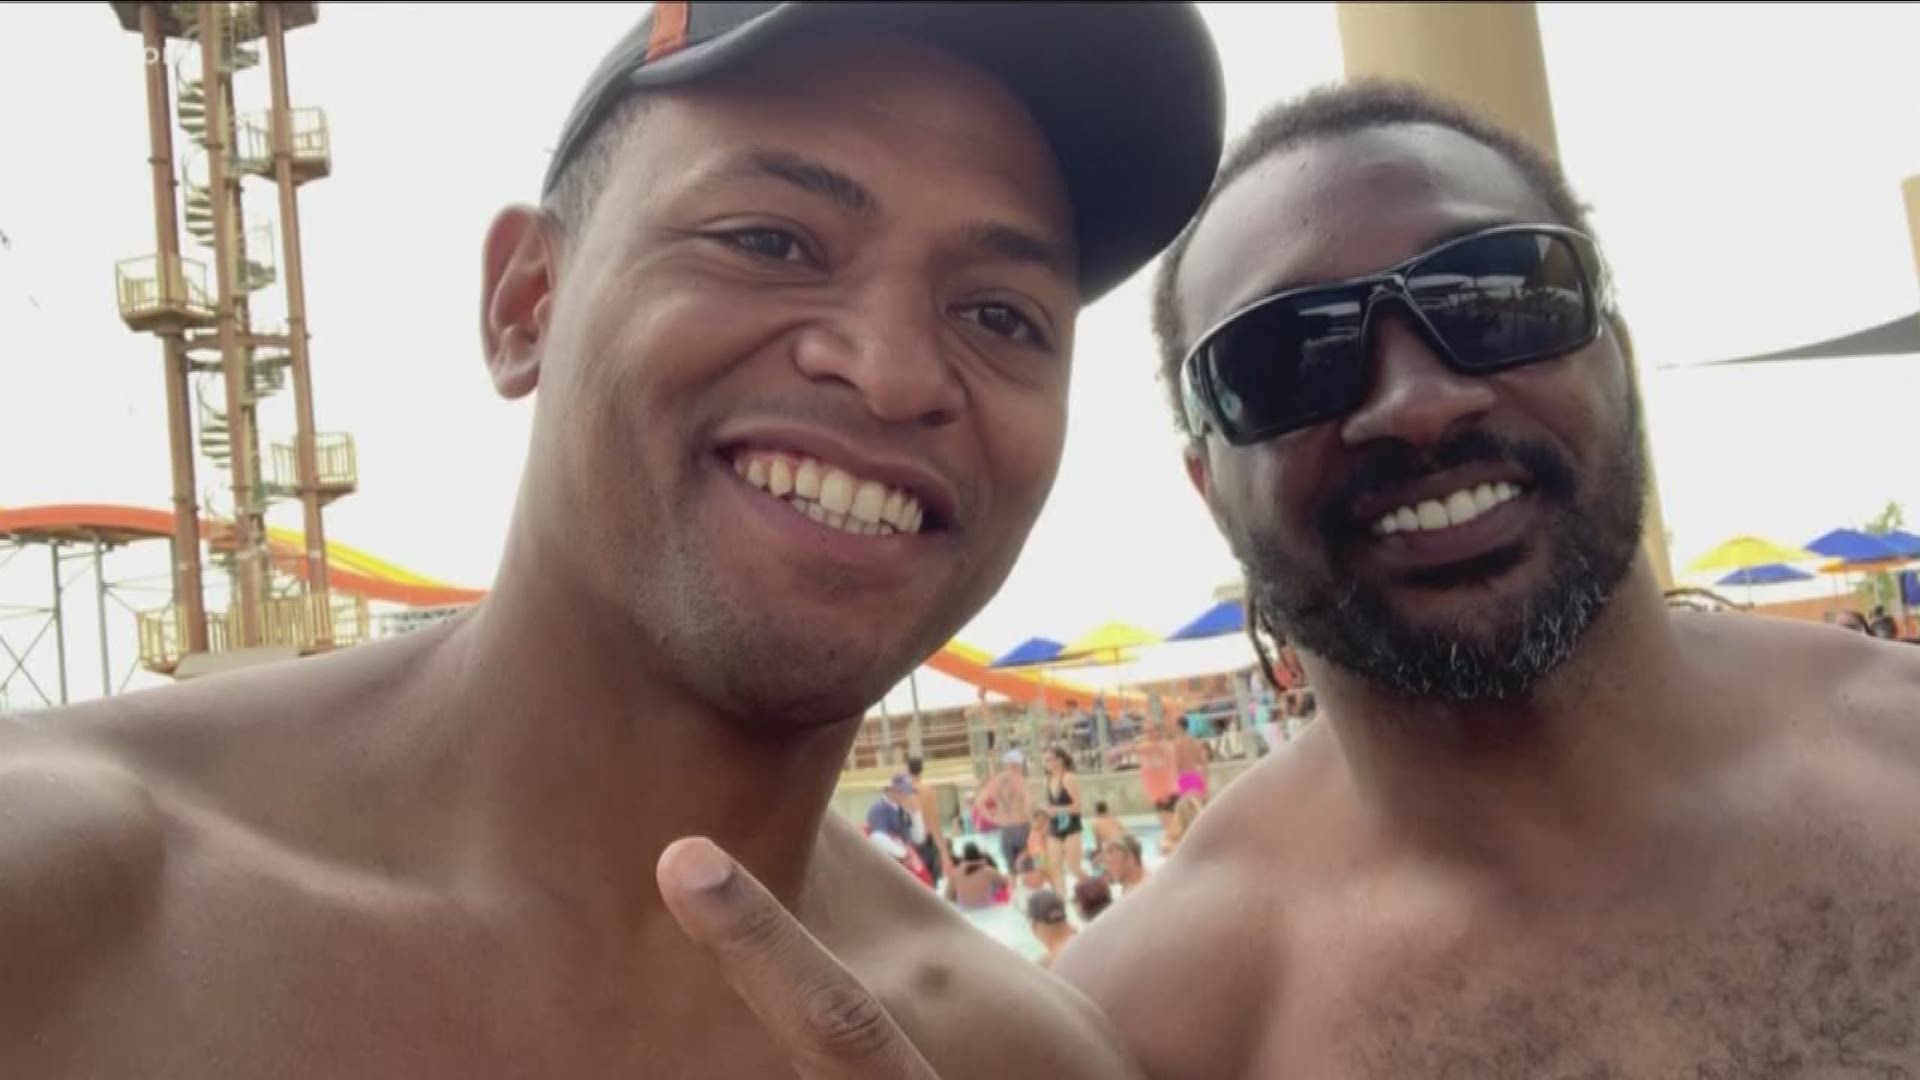 Cedric Benson – who was killed in a motorcycle crash on Saturday – and Will Matthews both played for the University of Texas. Matthews said they were running back brothers.